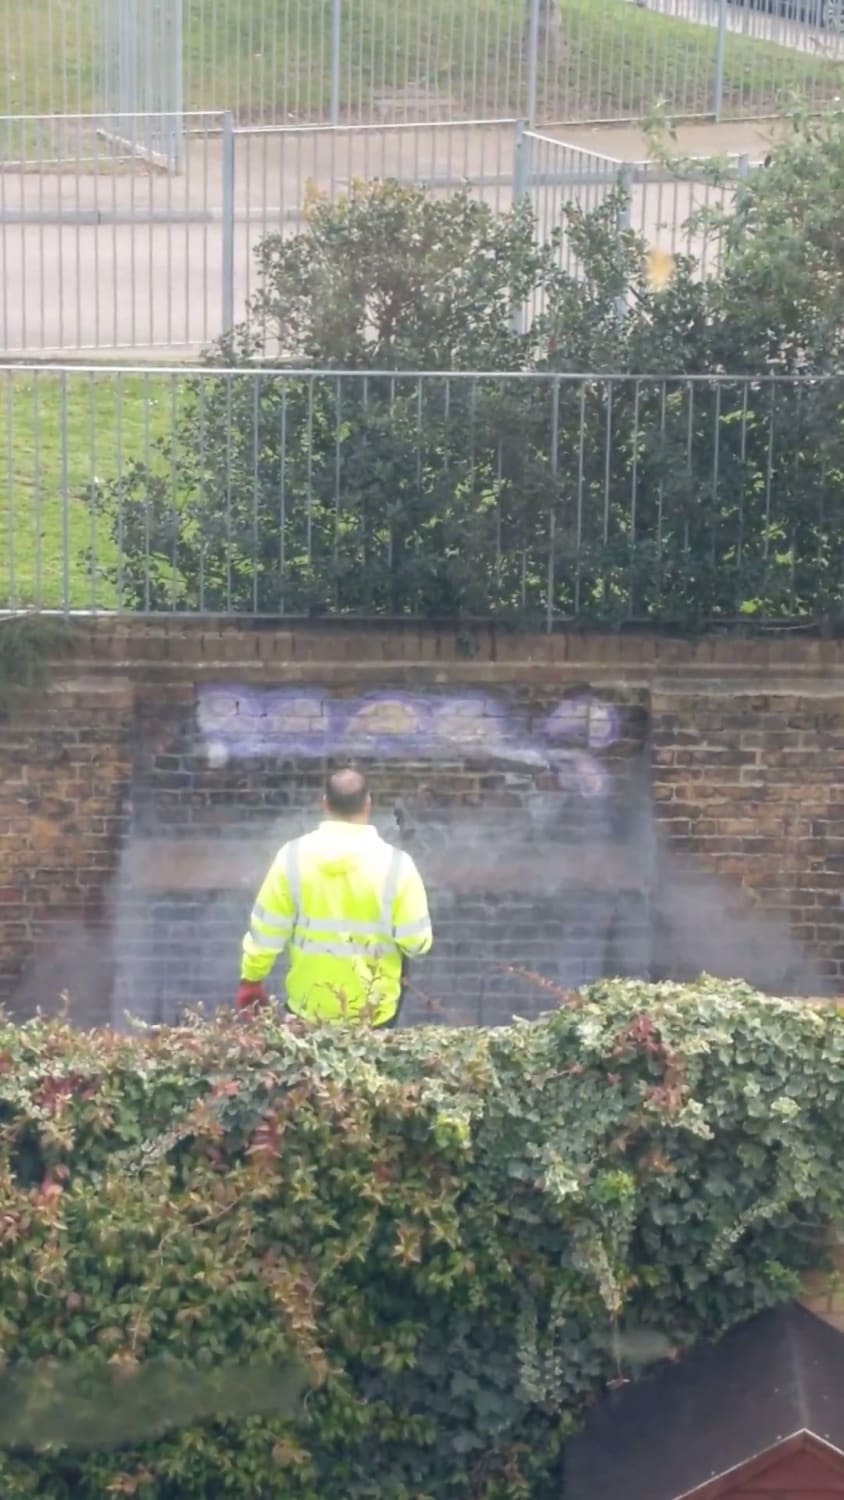 Council worker cleaning graffiti off the wall behind my house